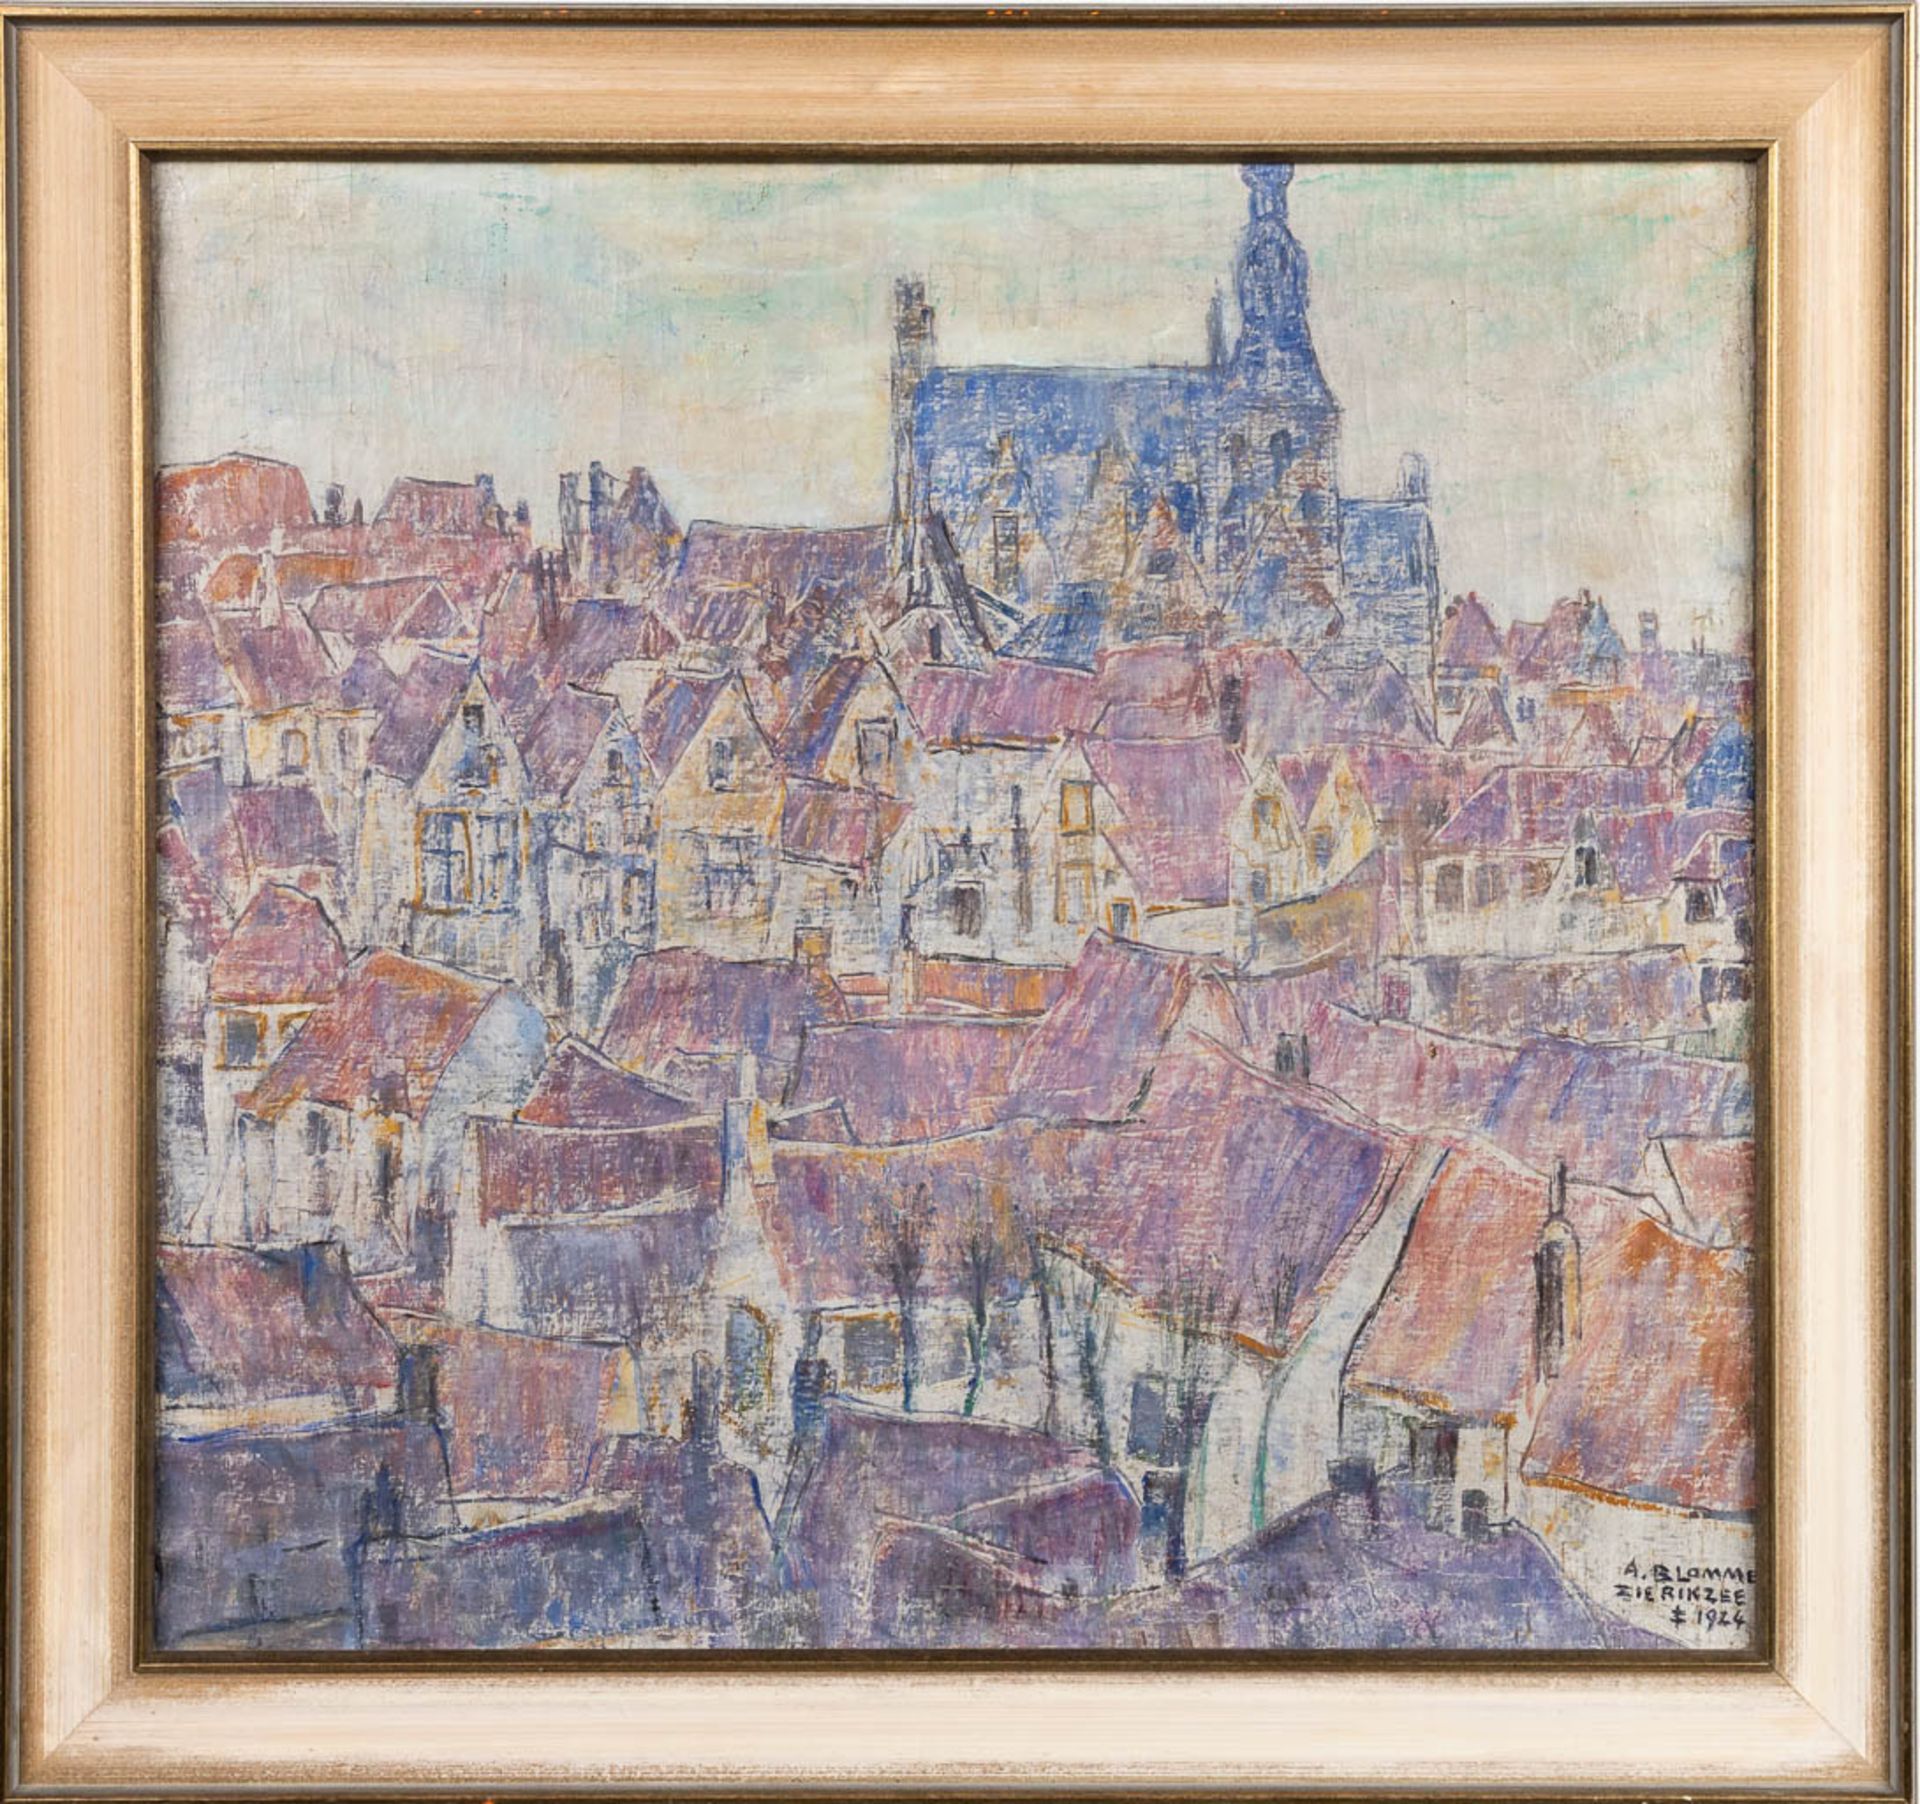 Alfons BLOMME (1889-1979) 'Zierikzee' oil on canvas (70 x 66cm) - Image 4 of 8